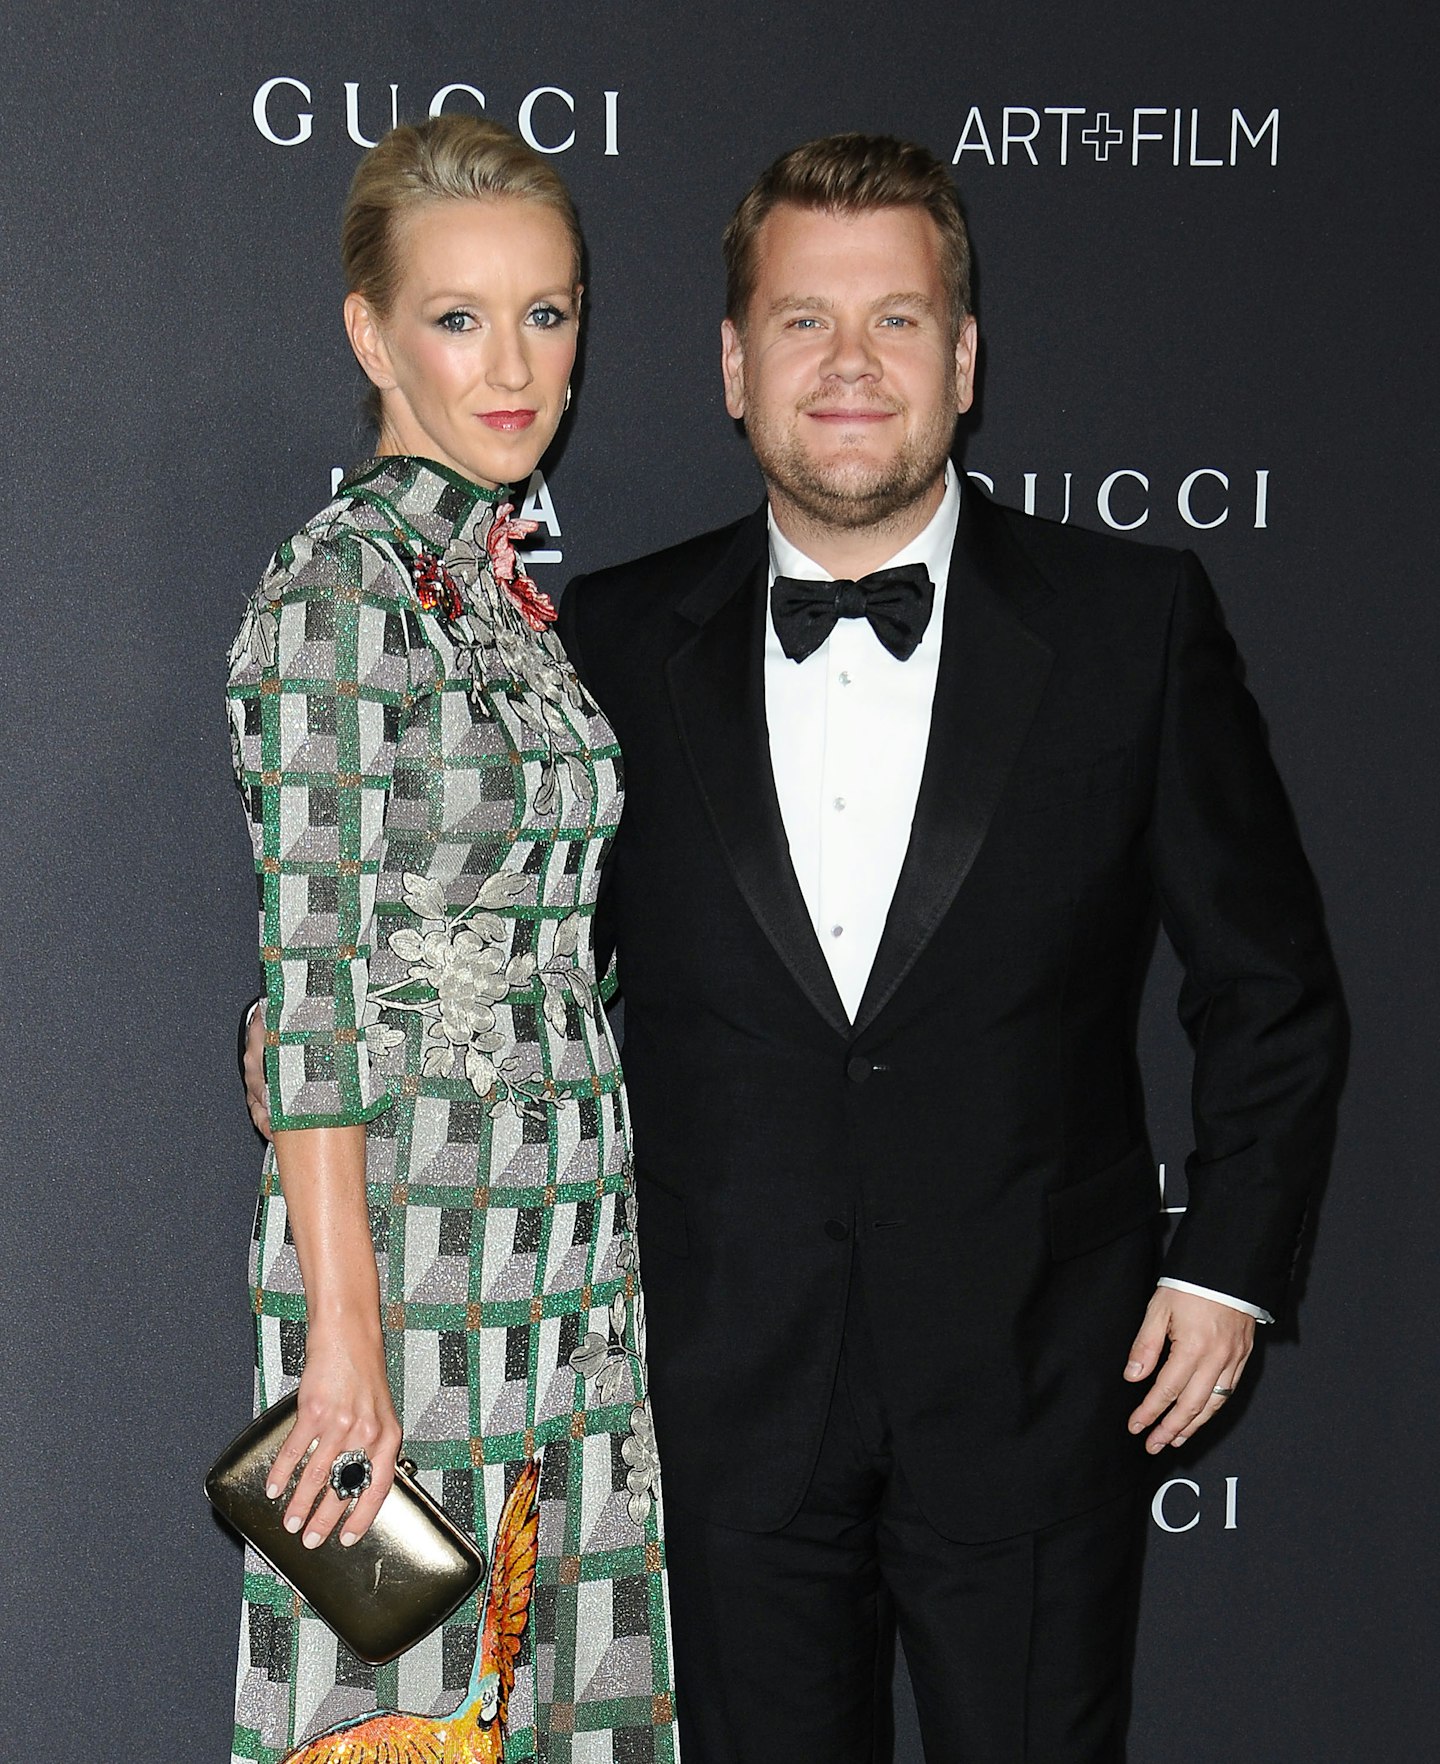 James Corden and his wife